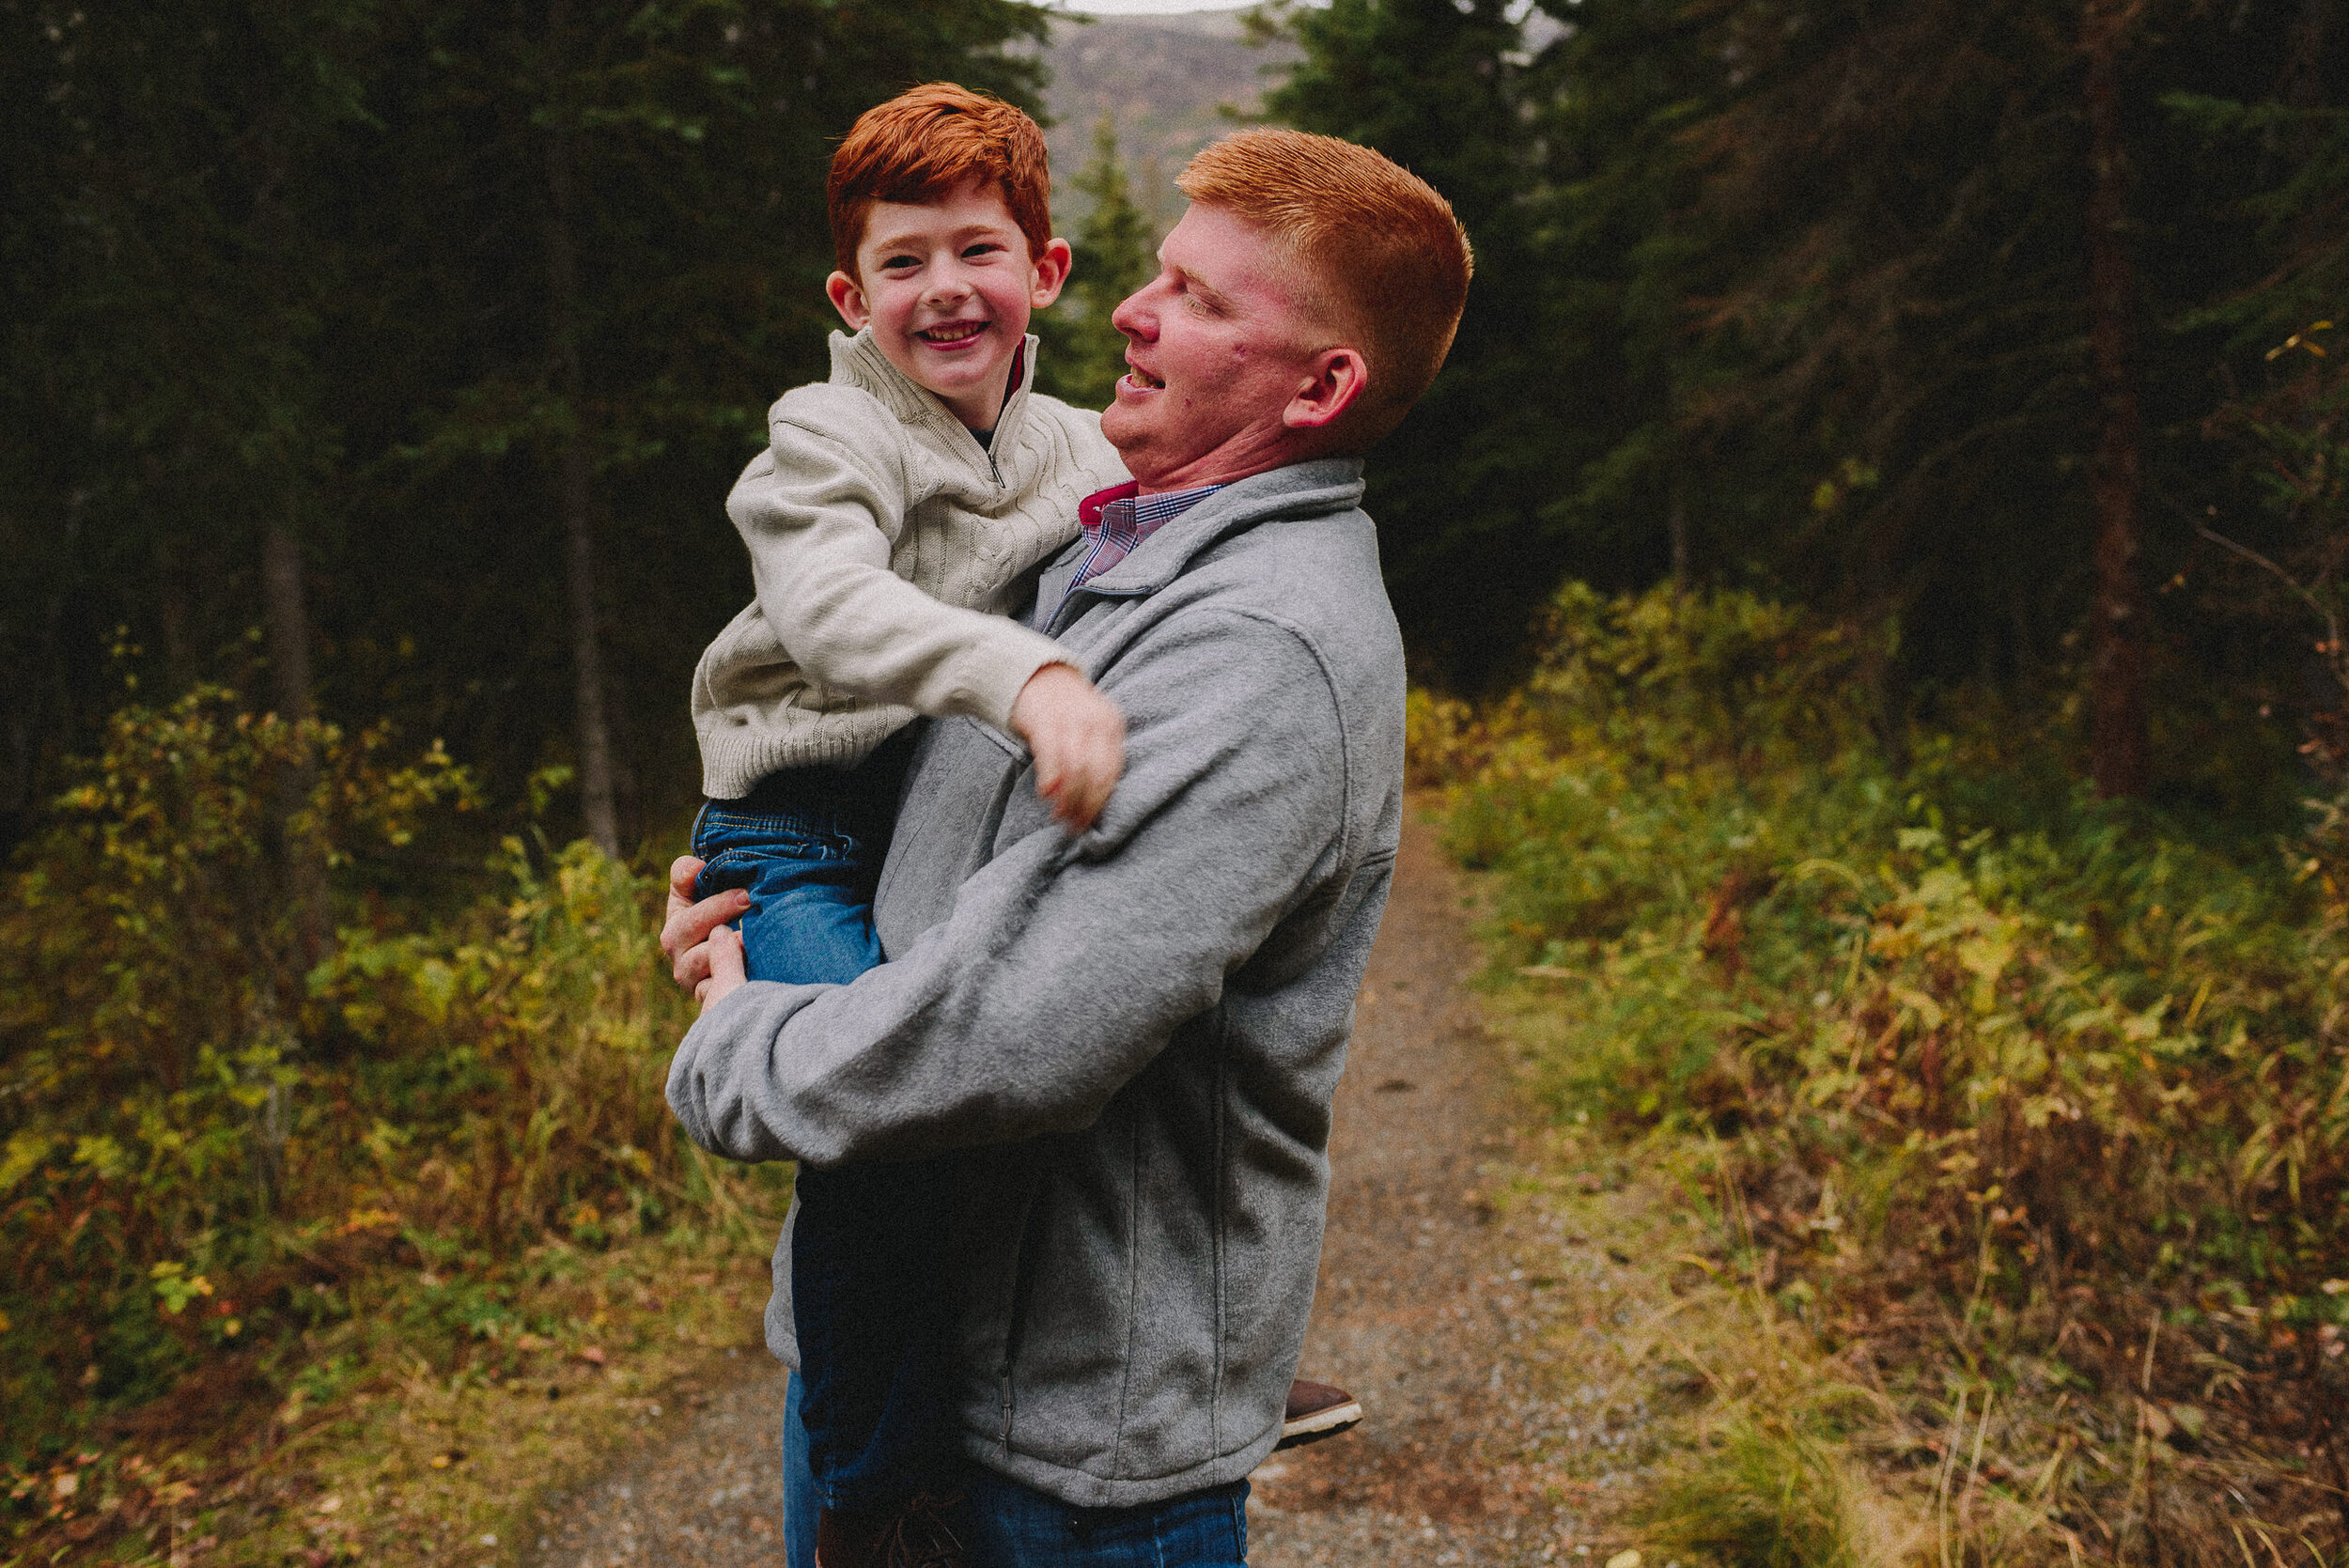 north-fork-eagle-river-fall-family-session-alaska-photographer-way-up-north-photography (165).jpg